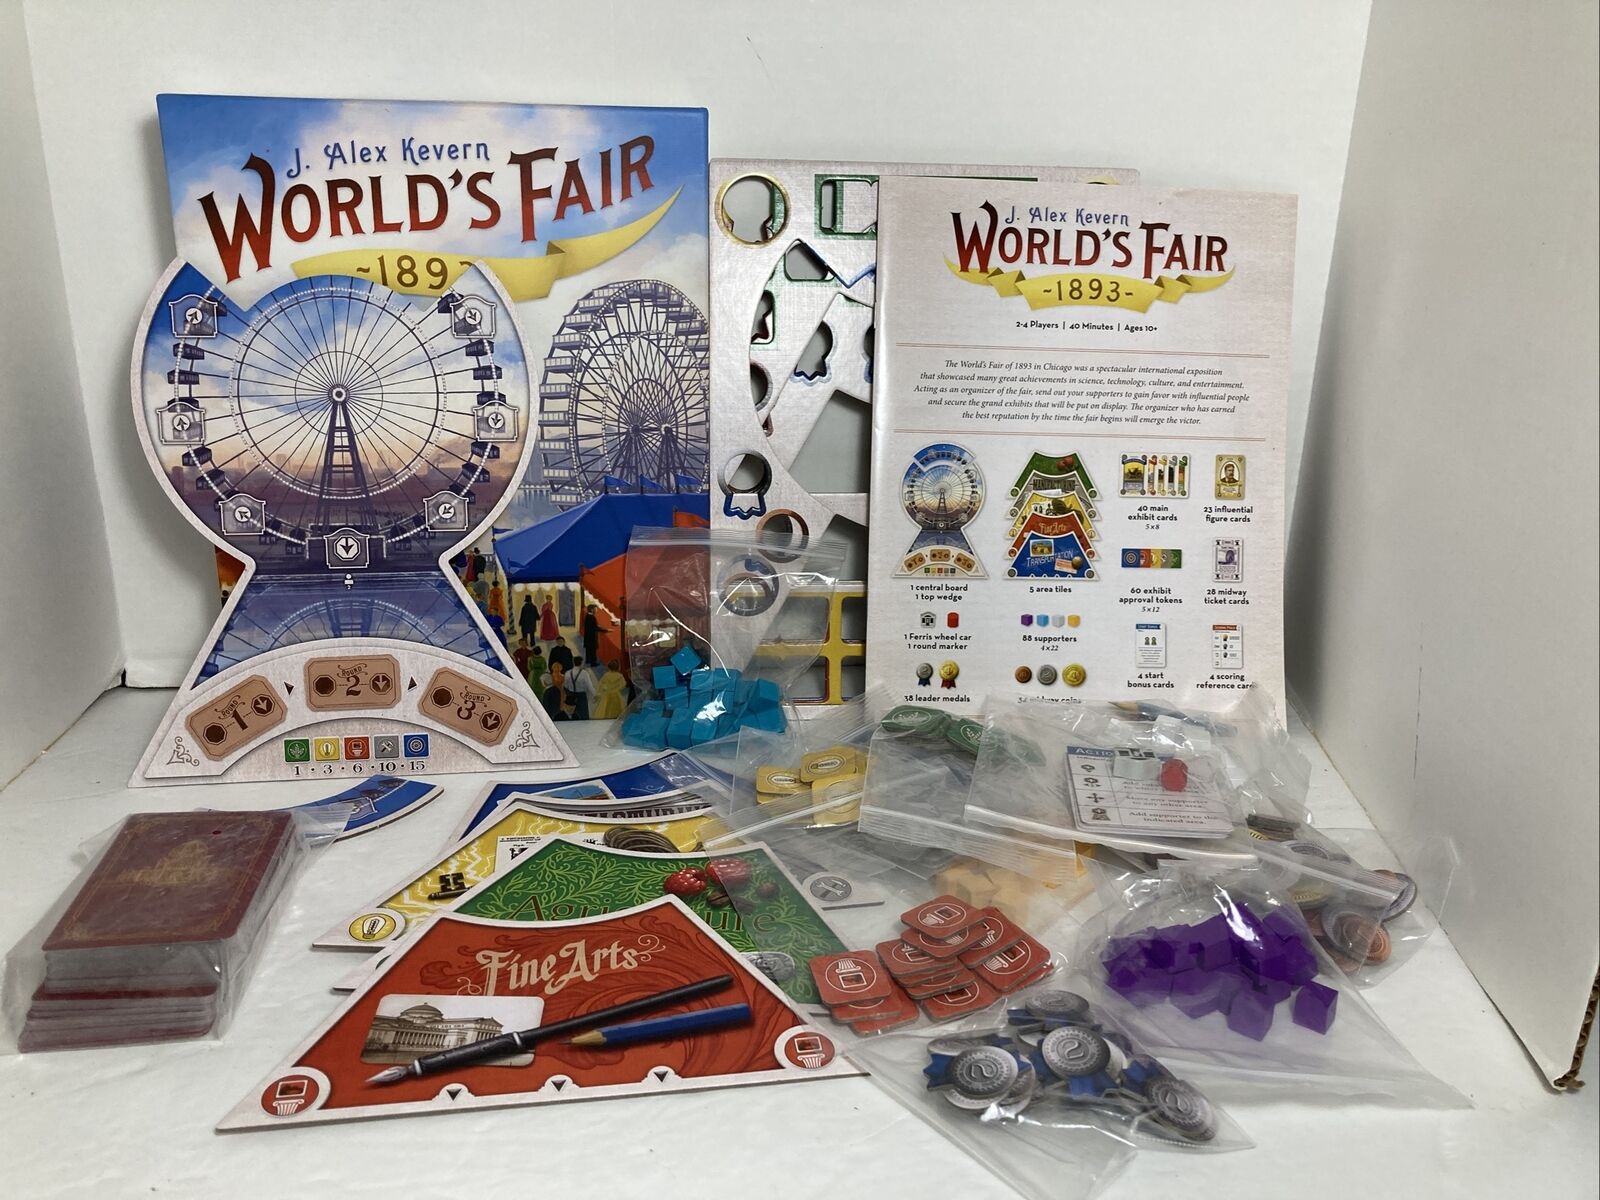 World’s Fair 1893 World's Board Game Renegade Studios 529 for sale online